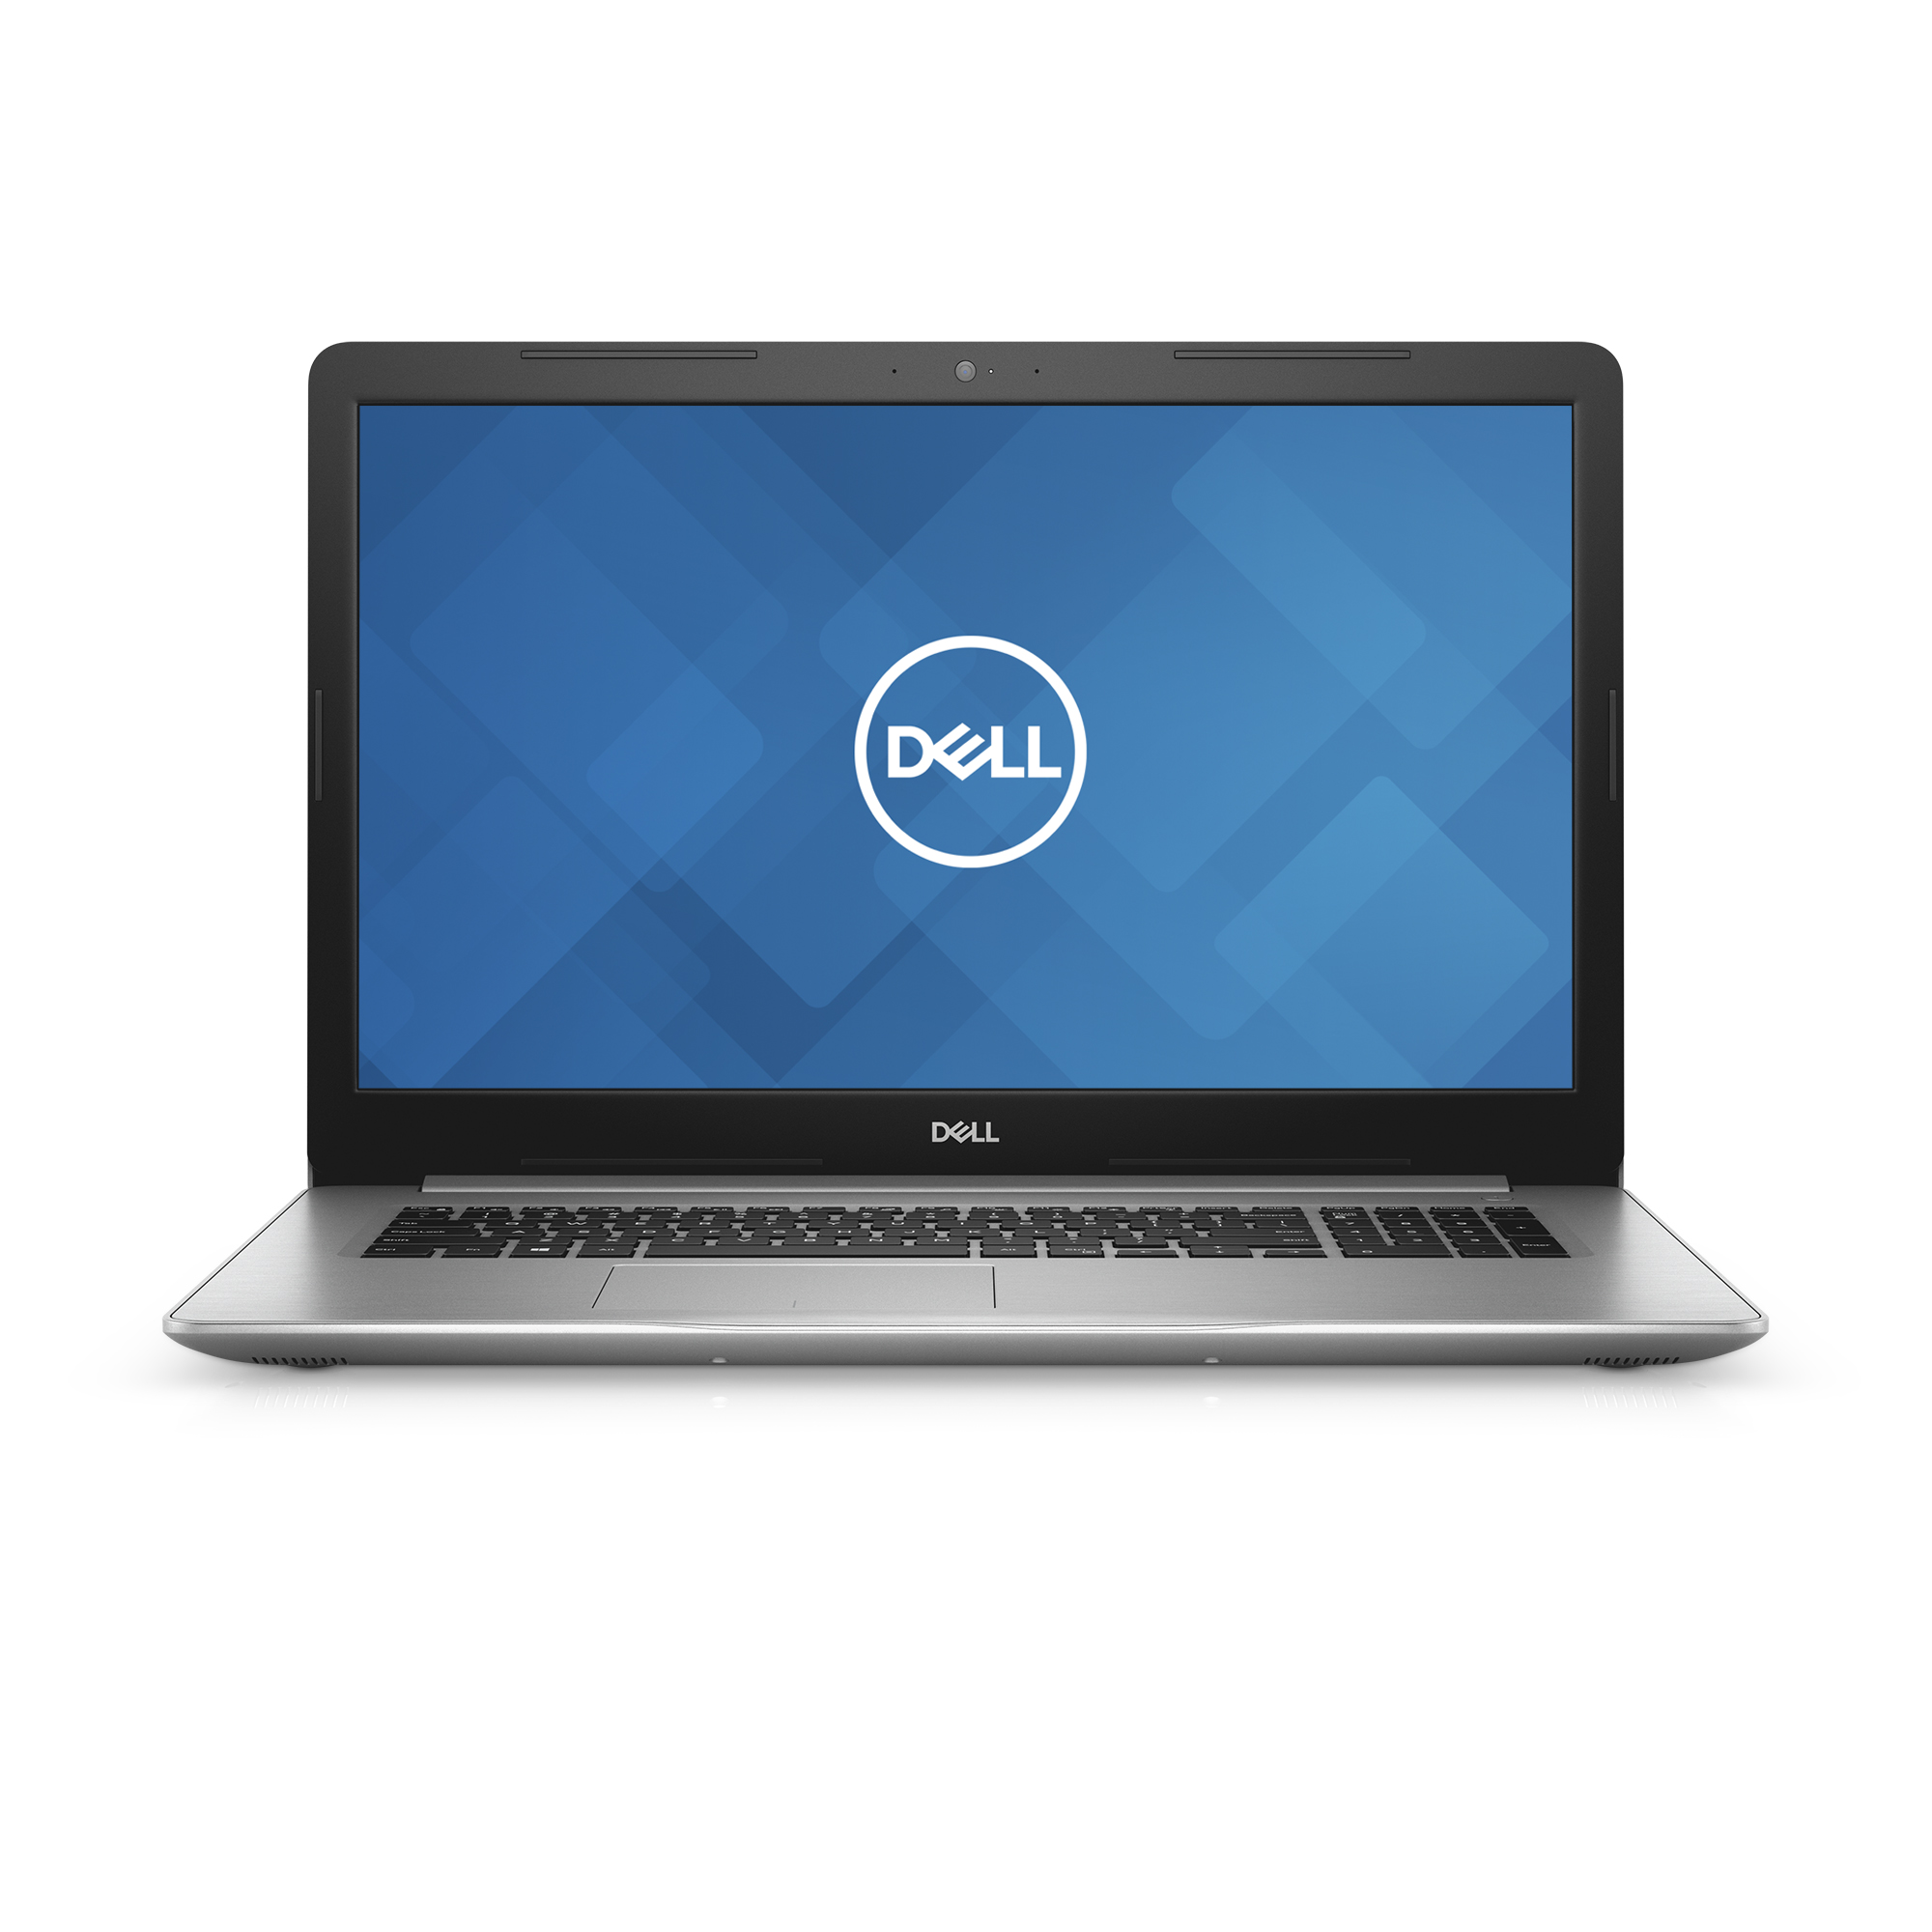 Dell Inspiron 15 5000 (5575) Laptop, 15.6”, AMD Ryzen 7 2700U, 8GB RAM, 1TB HDD, Integrated Graphics, Windows 10 Home, i5575-A472SLV-PUS - image 3 of 11